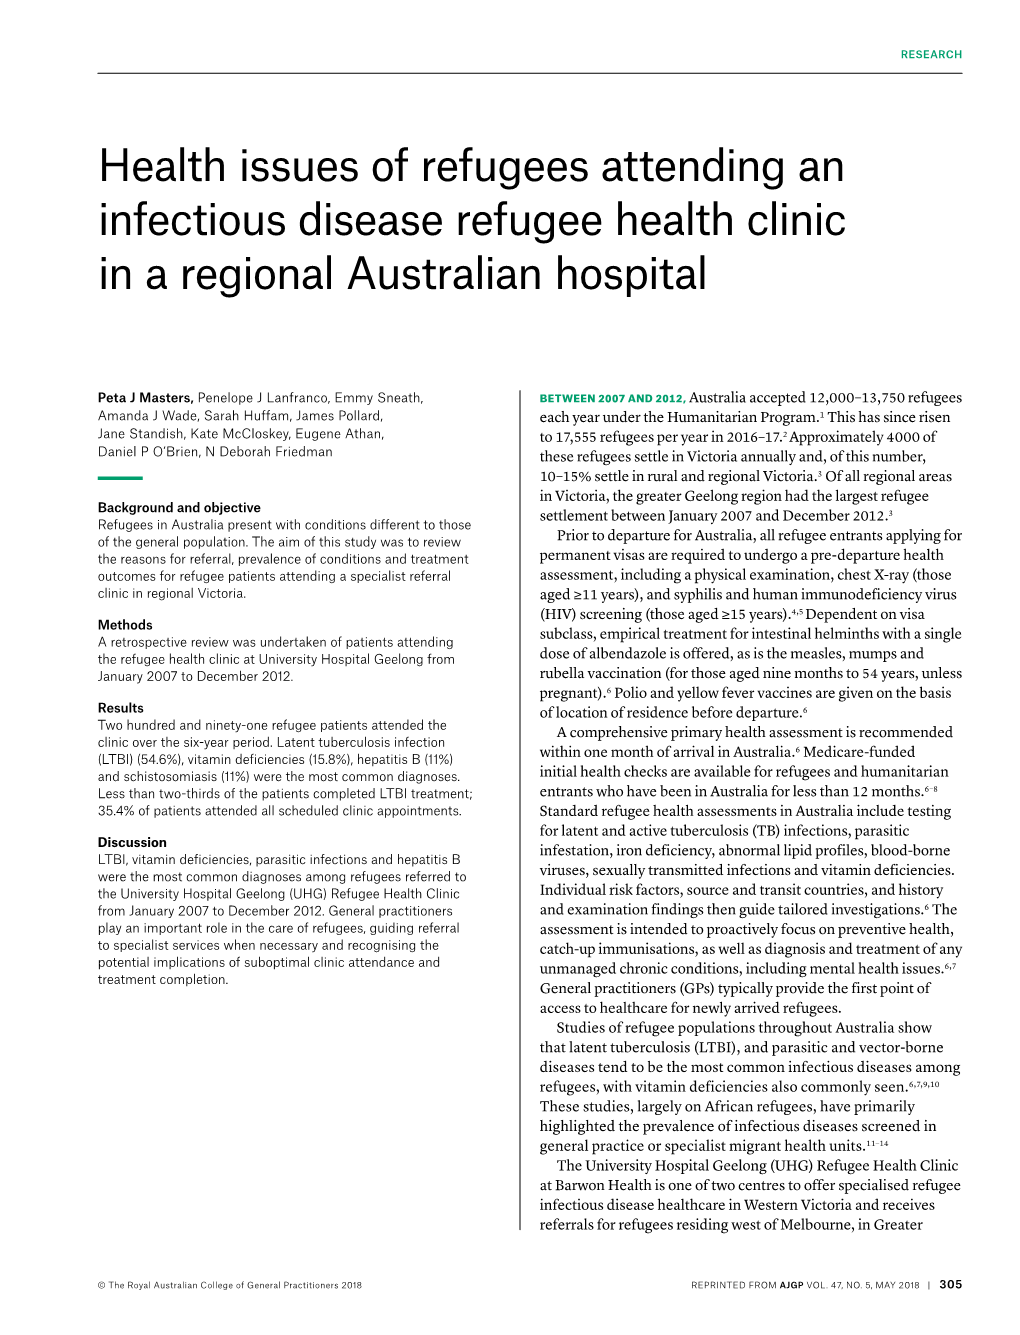 Health Issues of Refugees Attending an Infectious Disease Refugee Health Clinic in a Regional Australian Hospital